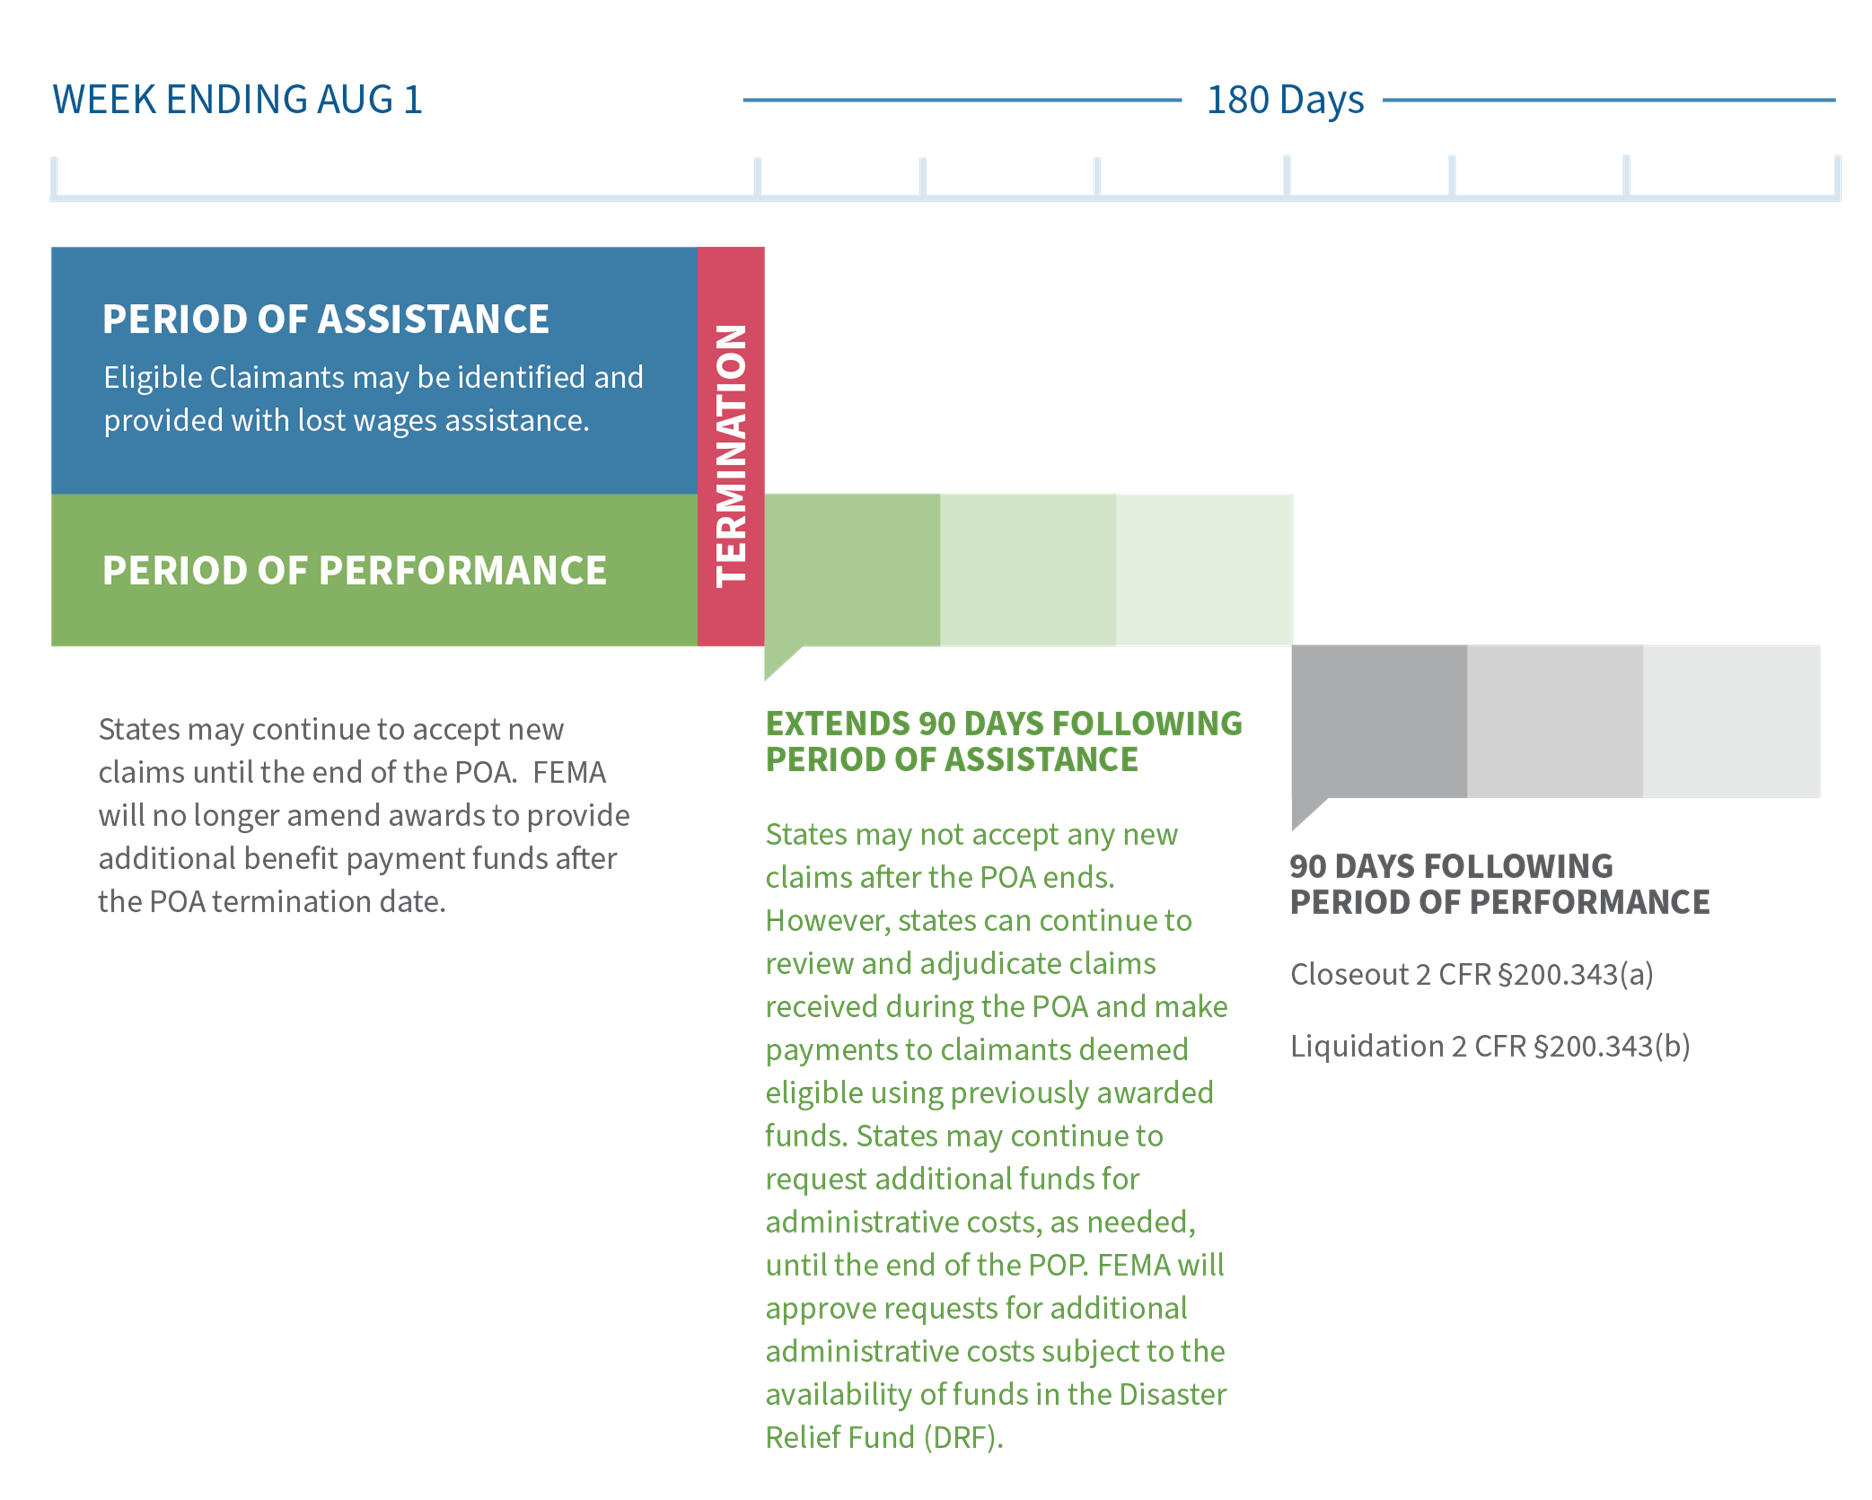 Graphic depicting the period of assistance and period of performance for the Lost Wages Assistance program